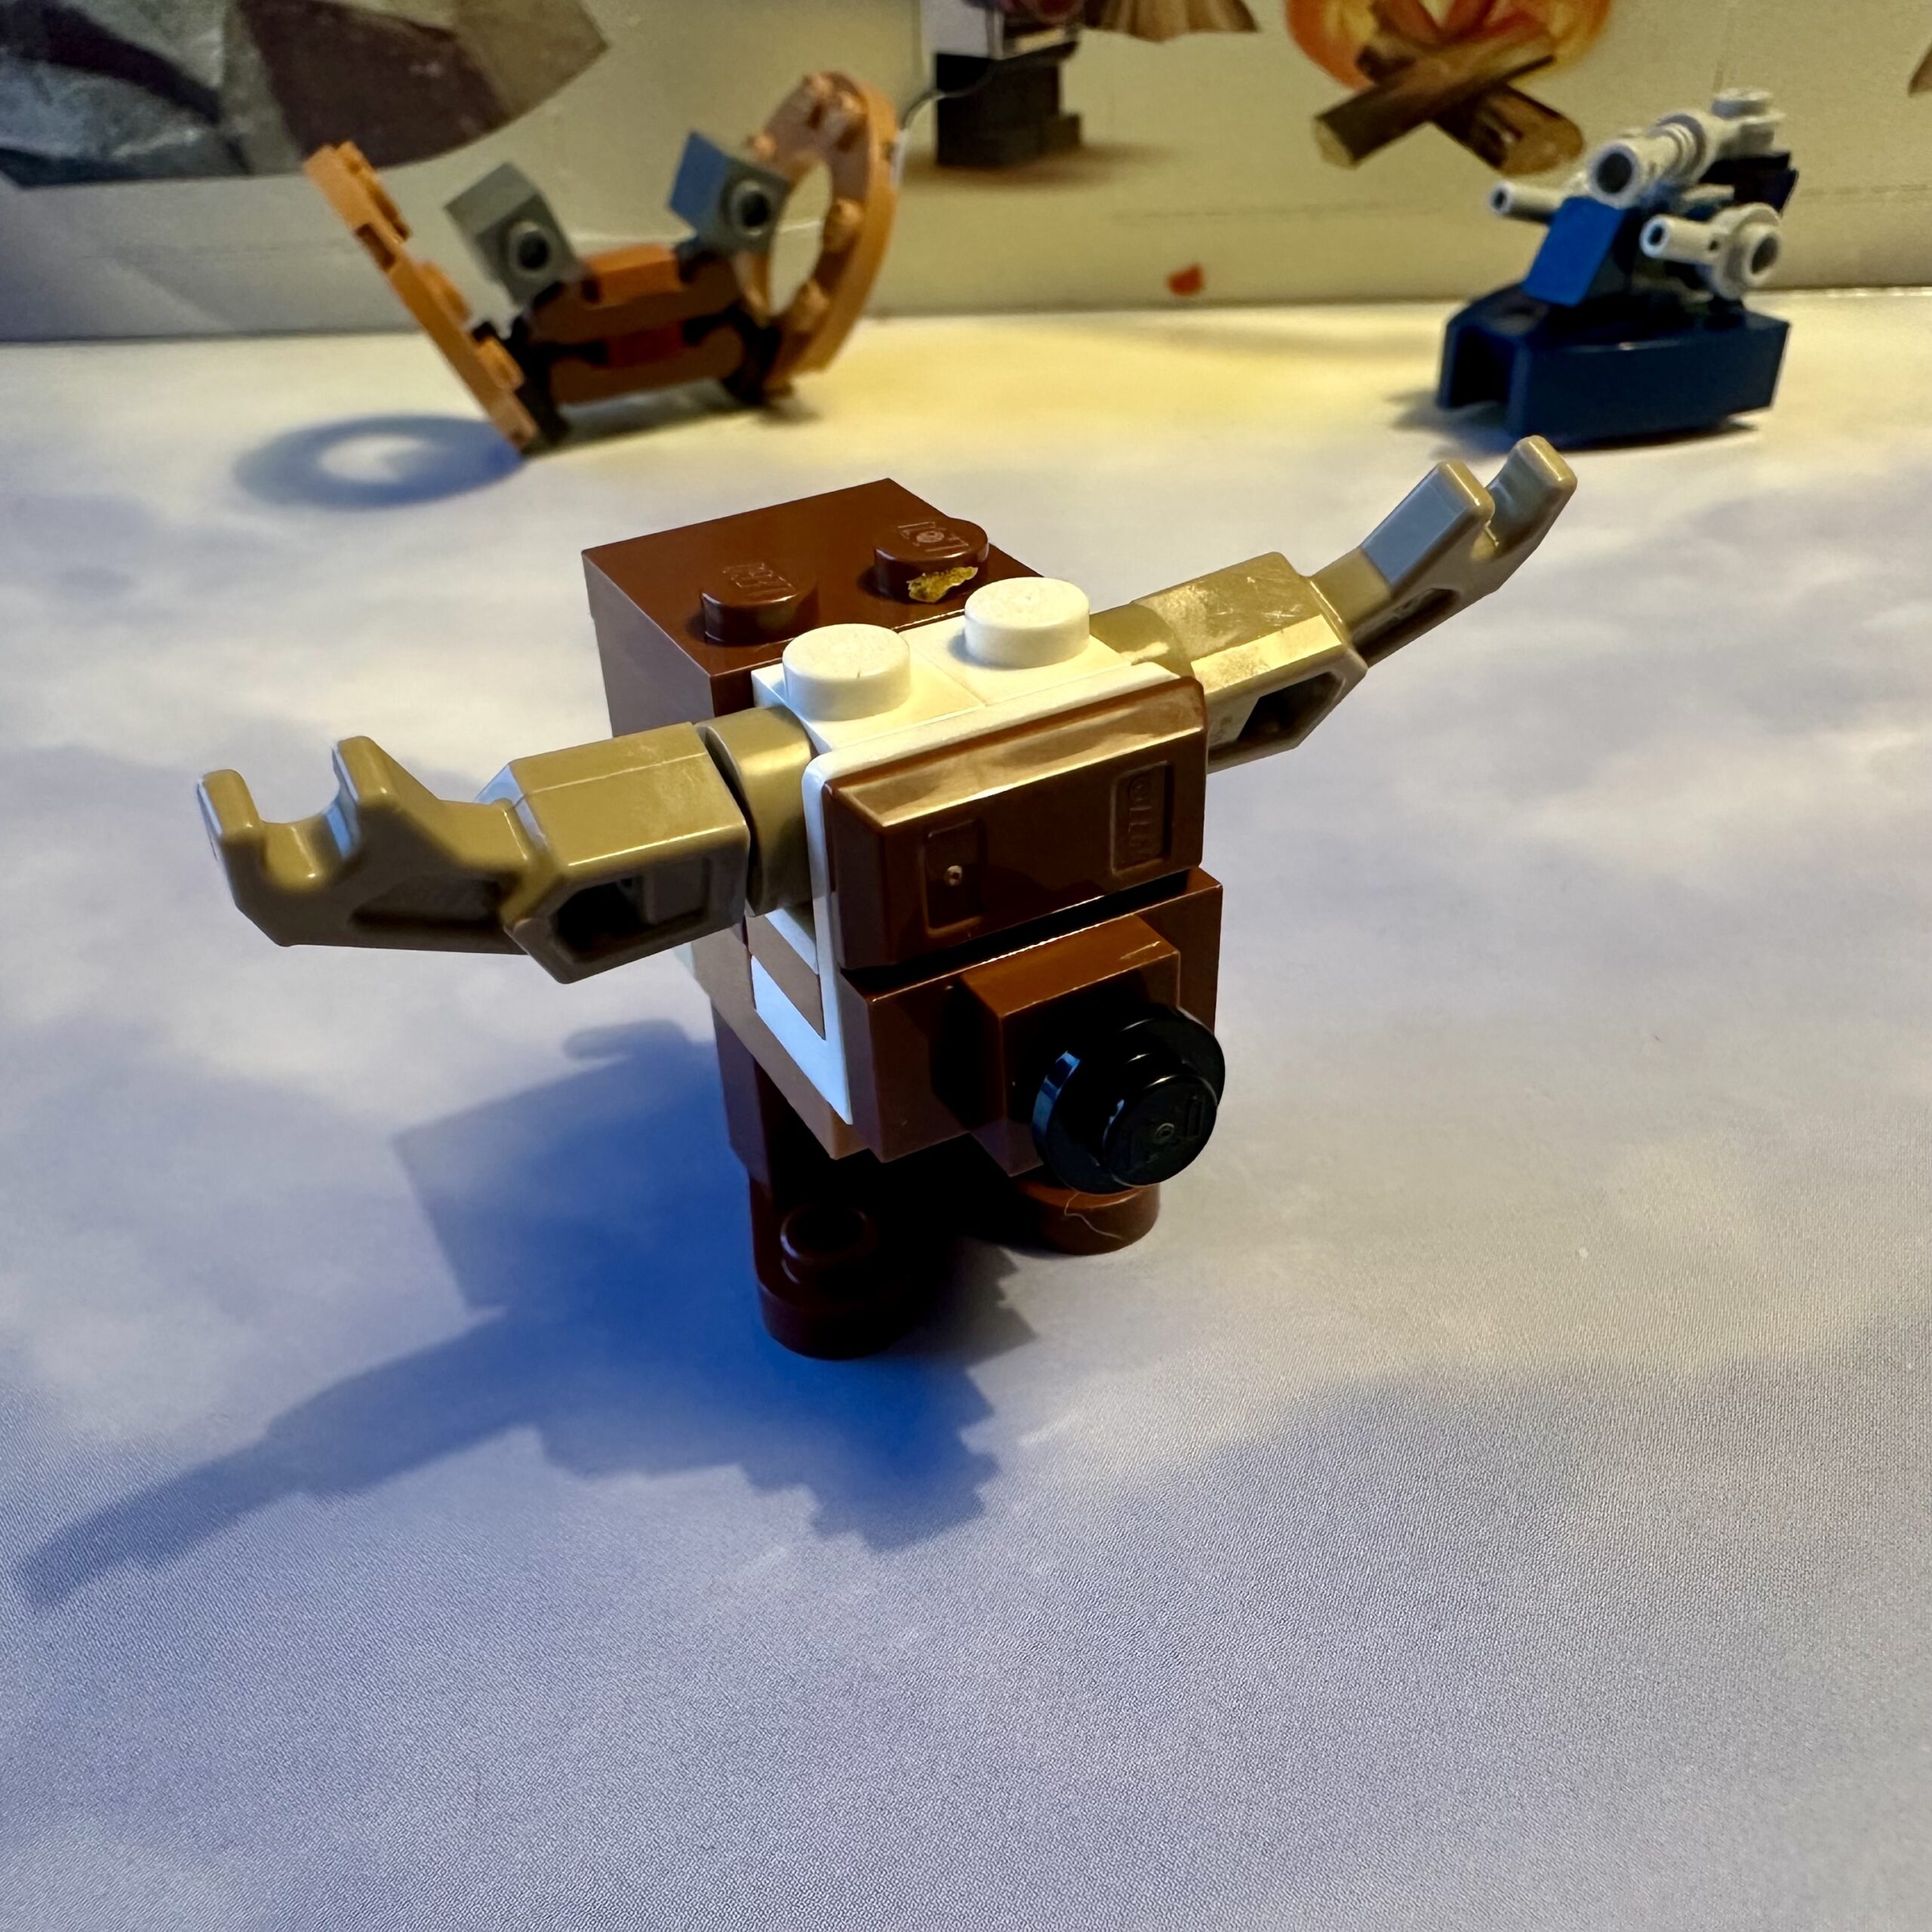 LEGO micro-build of a brown Star Wars GONK droid with tan antlers and a black nose.